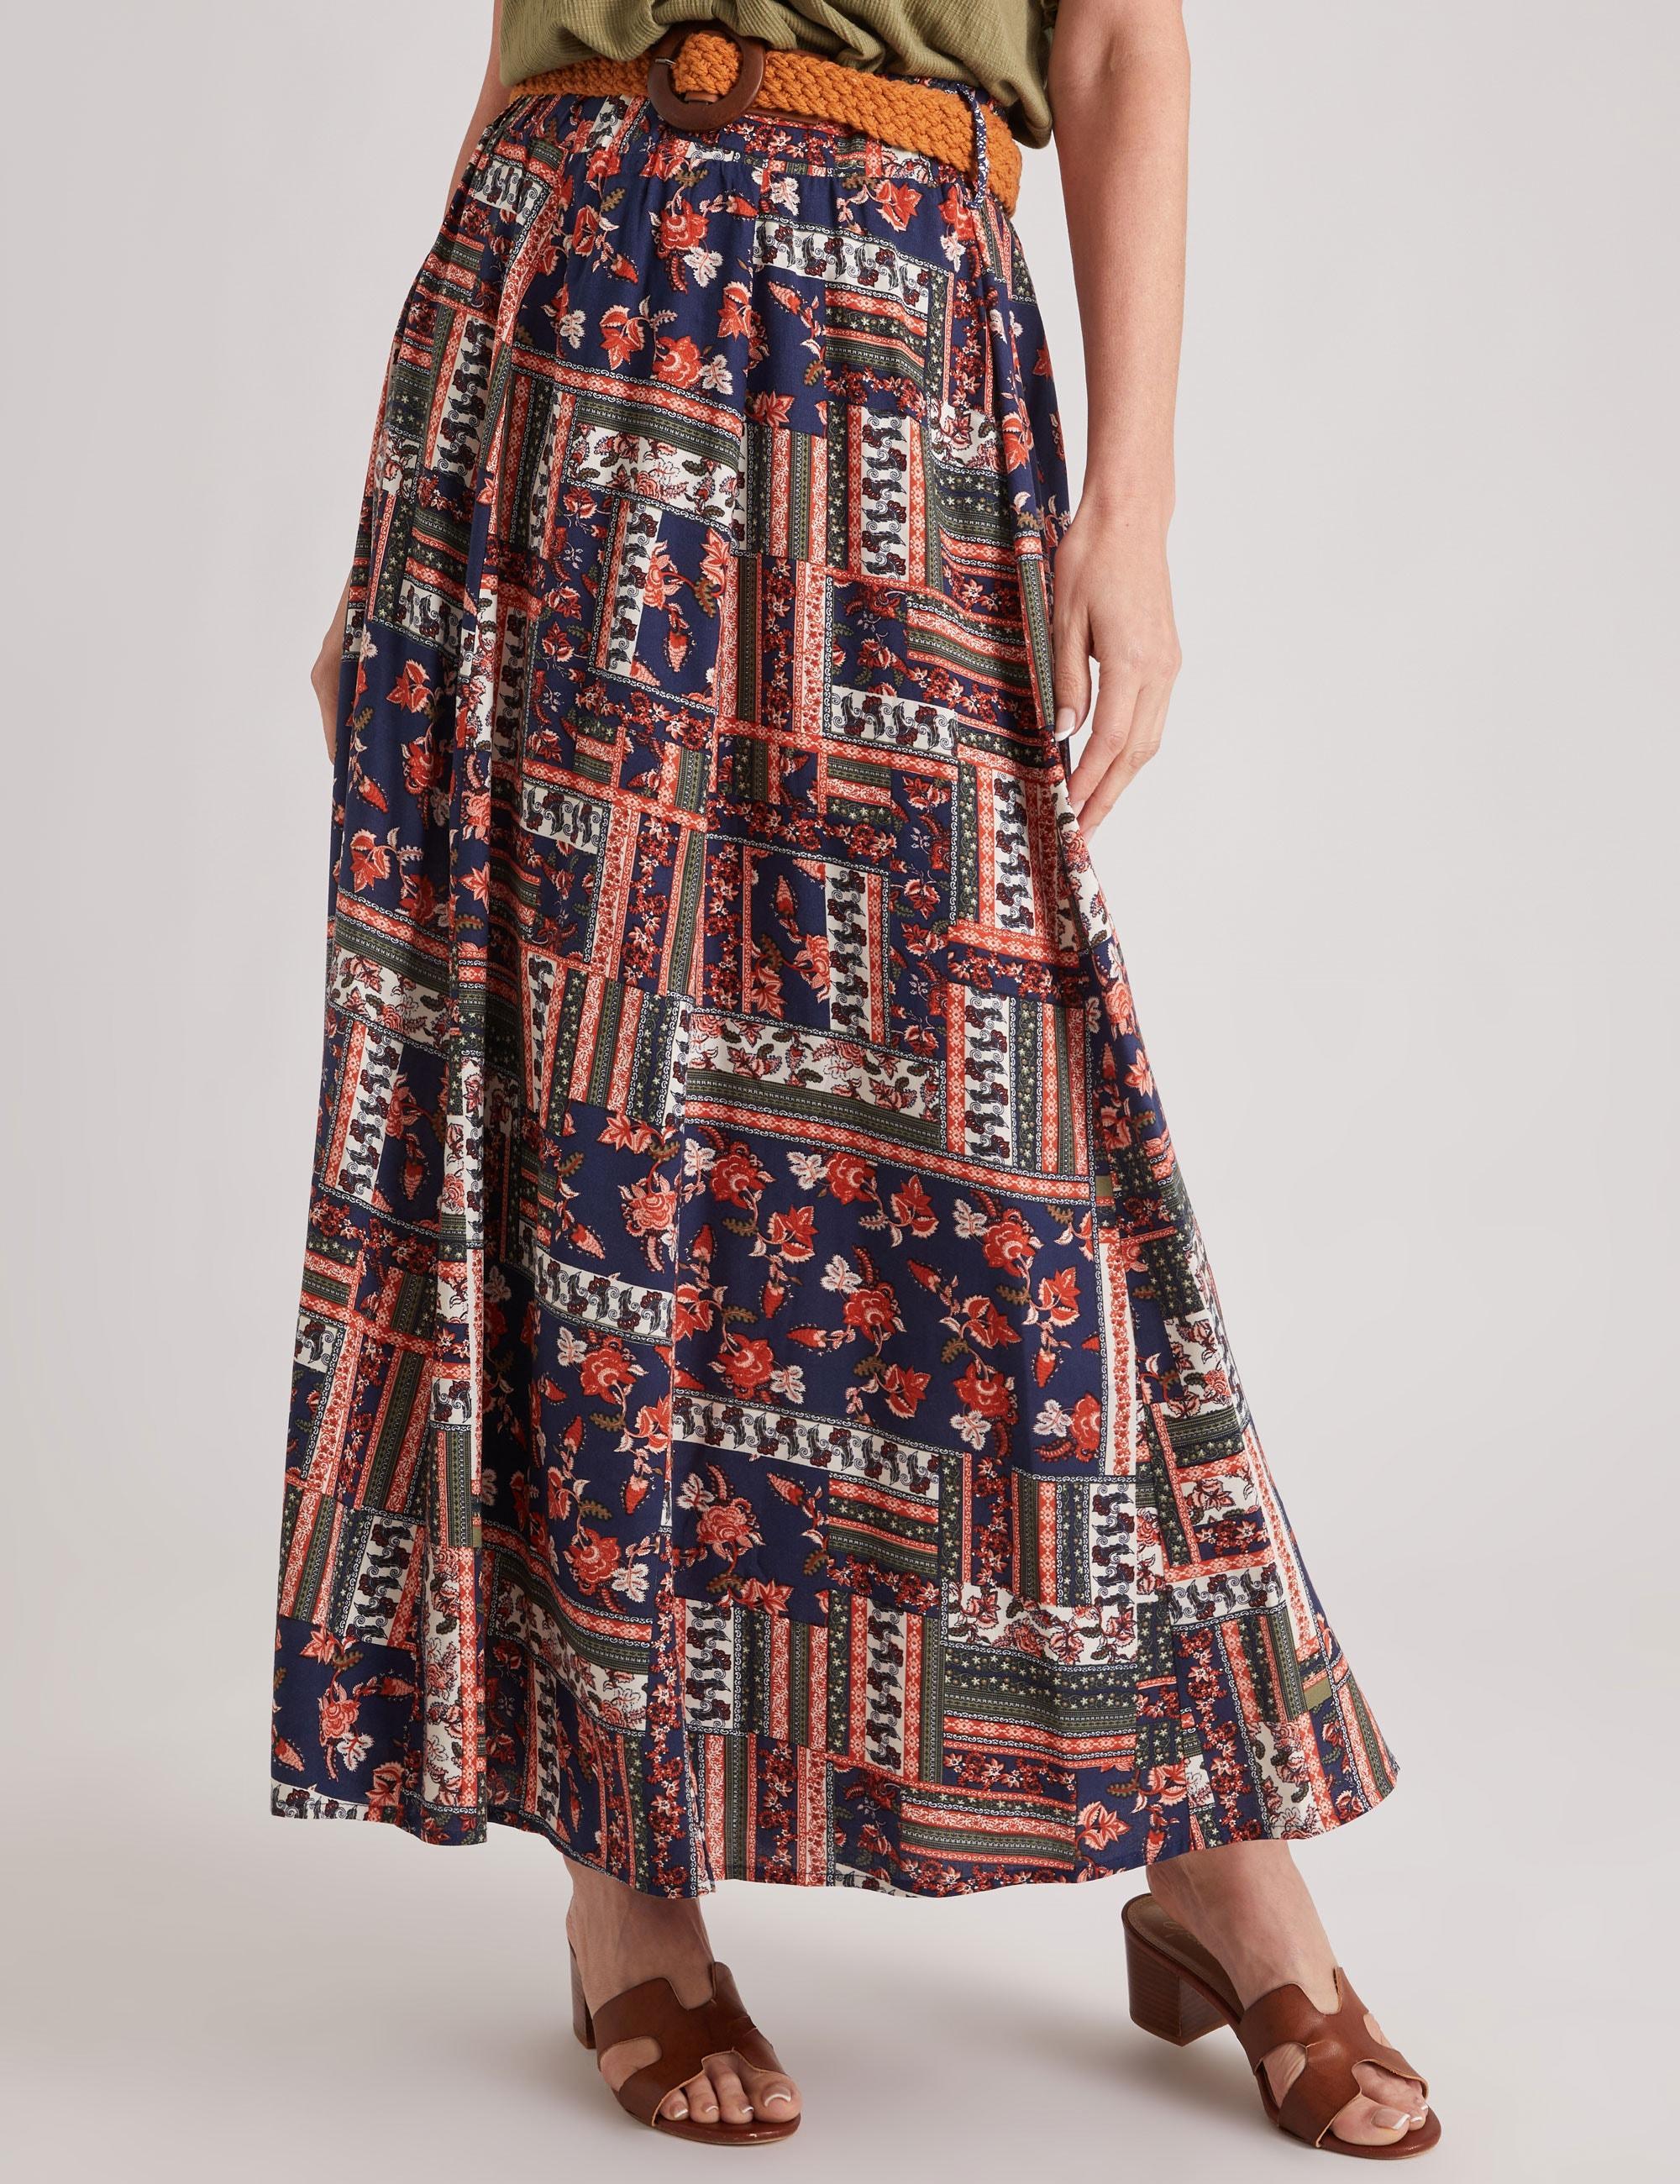 MILLERS - Womens Skirts - Maxi - Winter - Brown - Paisley - A Line - Fashion - Rust Tile - Relaxed Fit - Belted - Long - Casual Office - Work Clothes